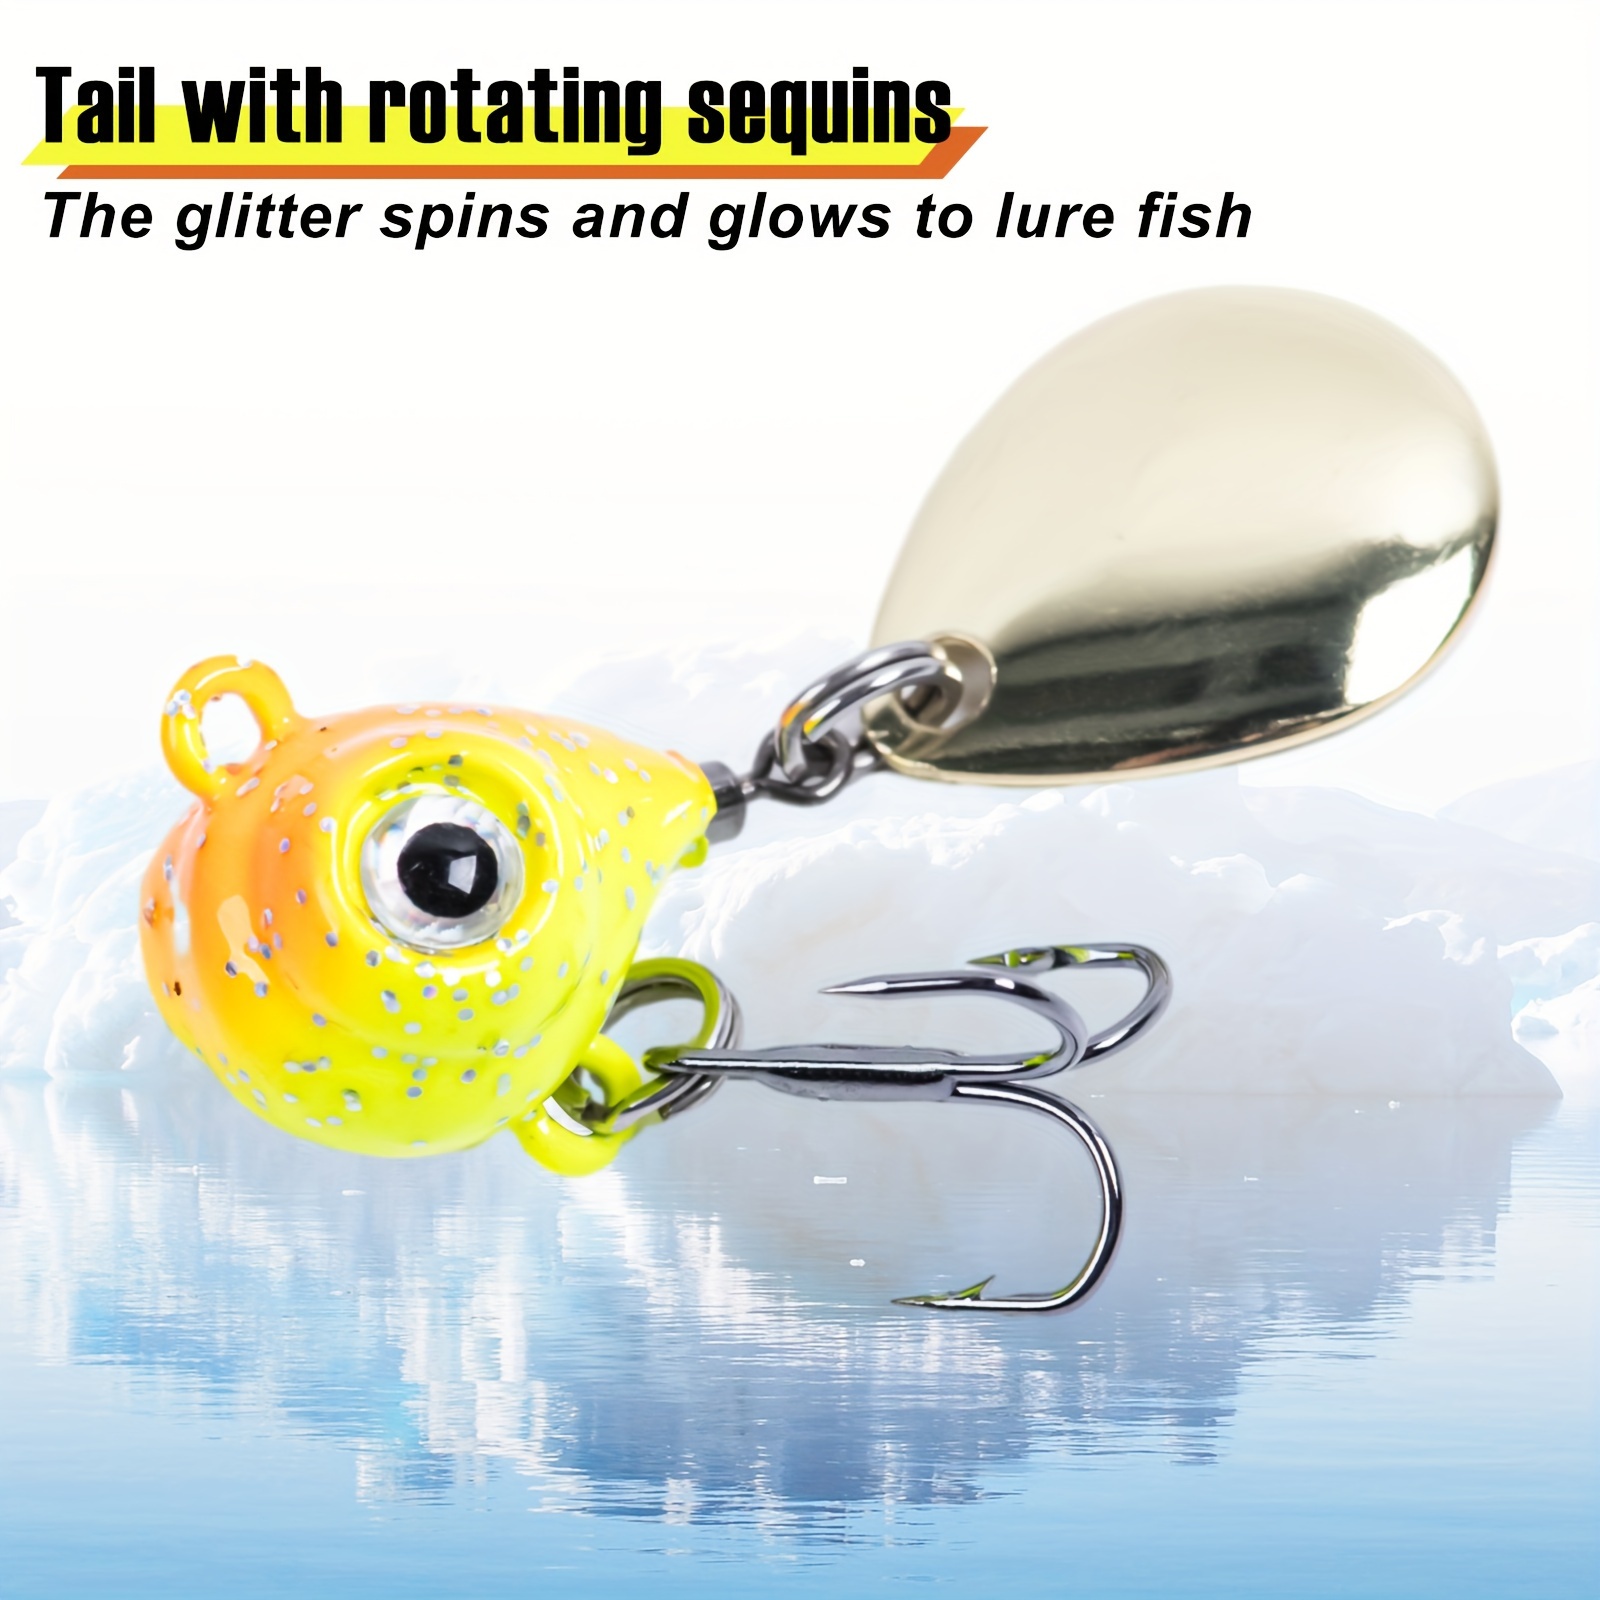 Goture Fishing Lures Fishing Spoons,Hard Lures Saltwater Spoon